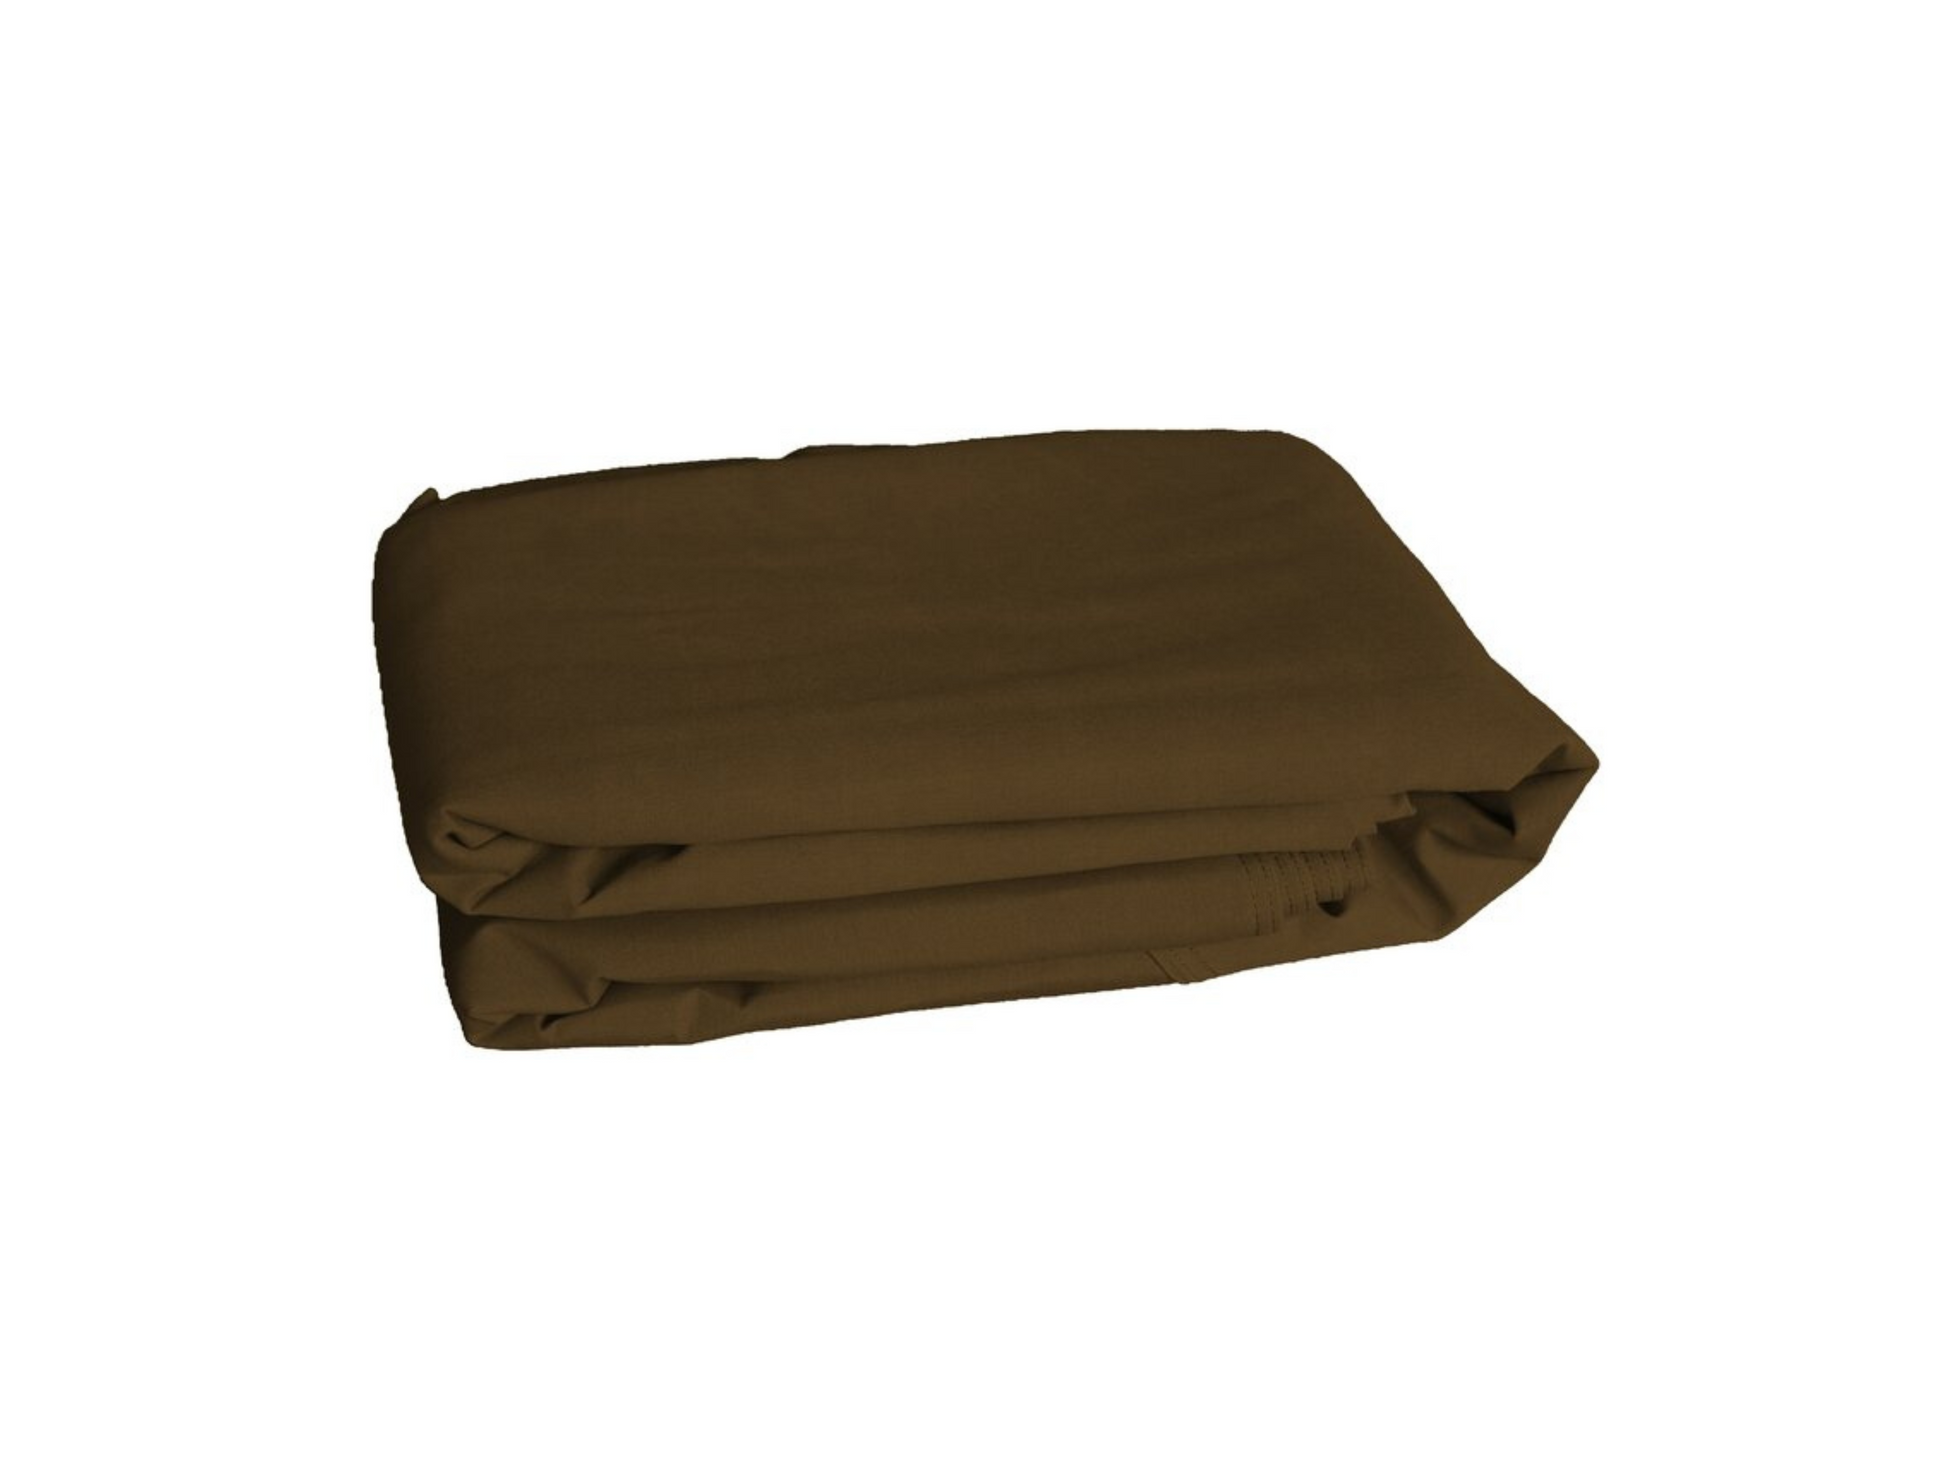 Replacement Canopy for Kingsbury Soft Top Gazebo in Cocoa Dome-Tex Fabric